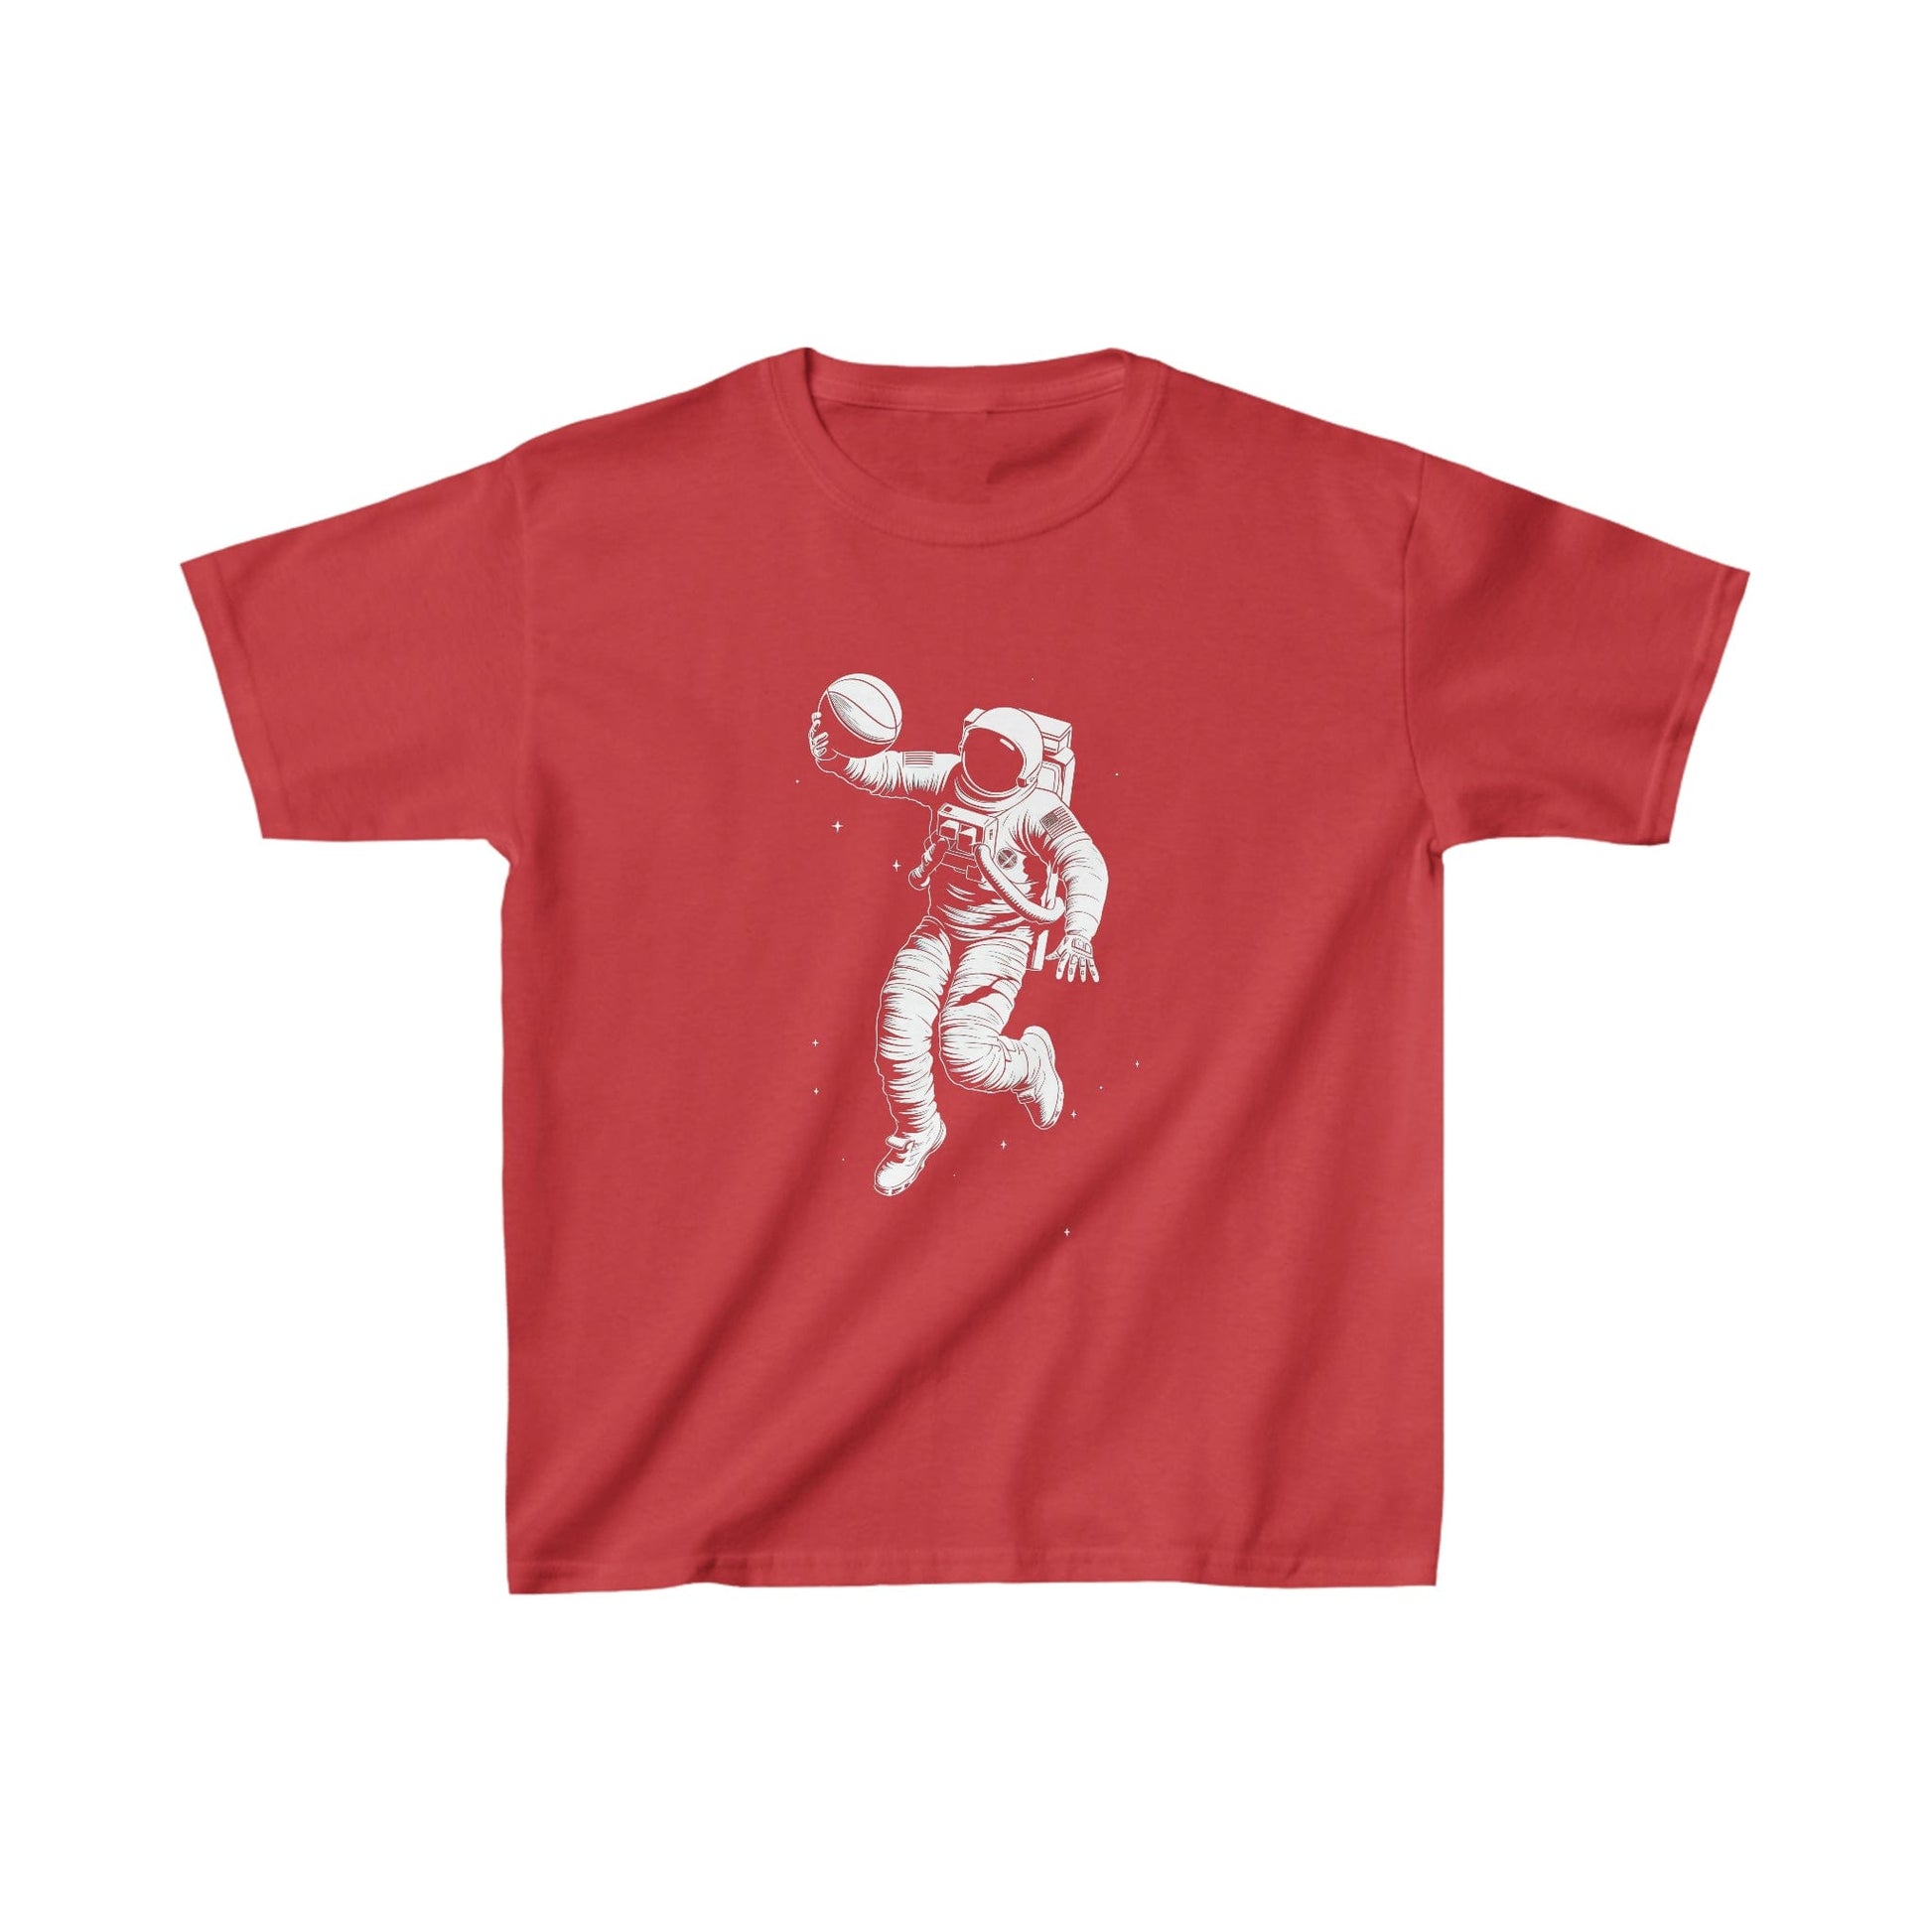 Kids clothes XS / Red Youth Astronaut Basketball T-Shirt